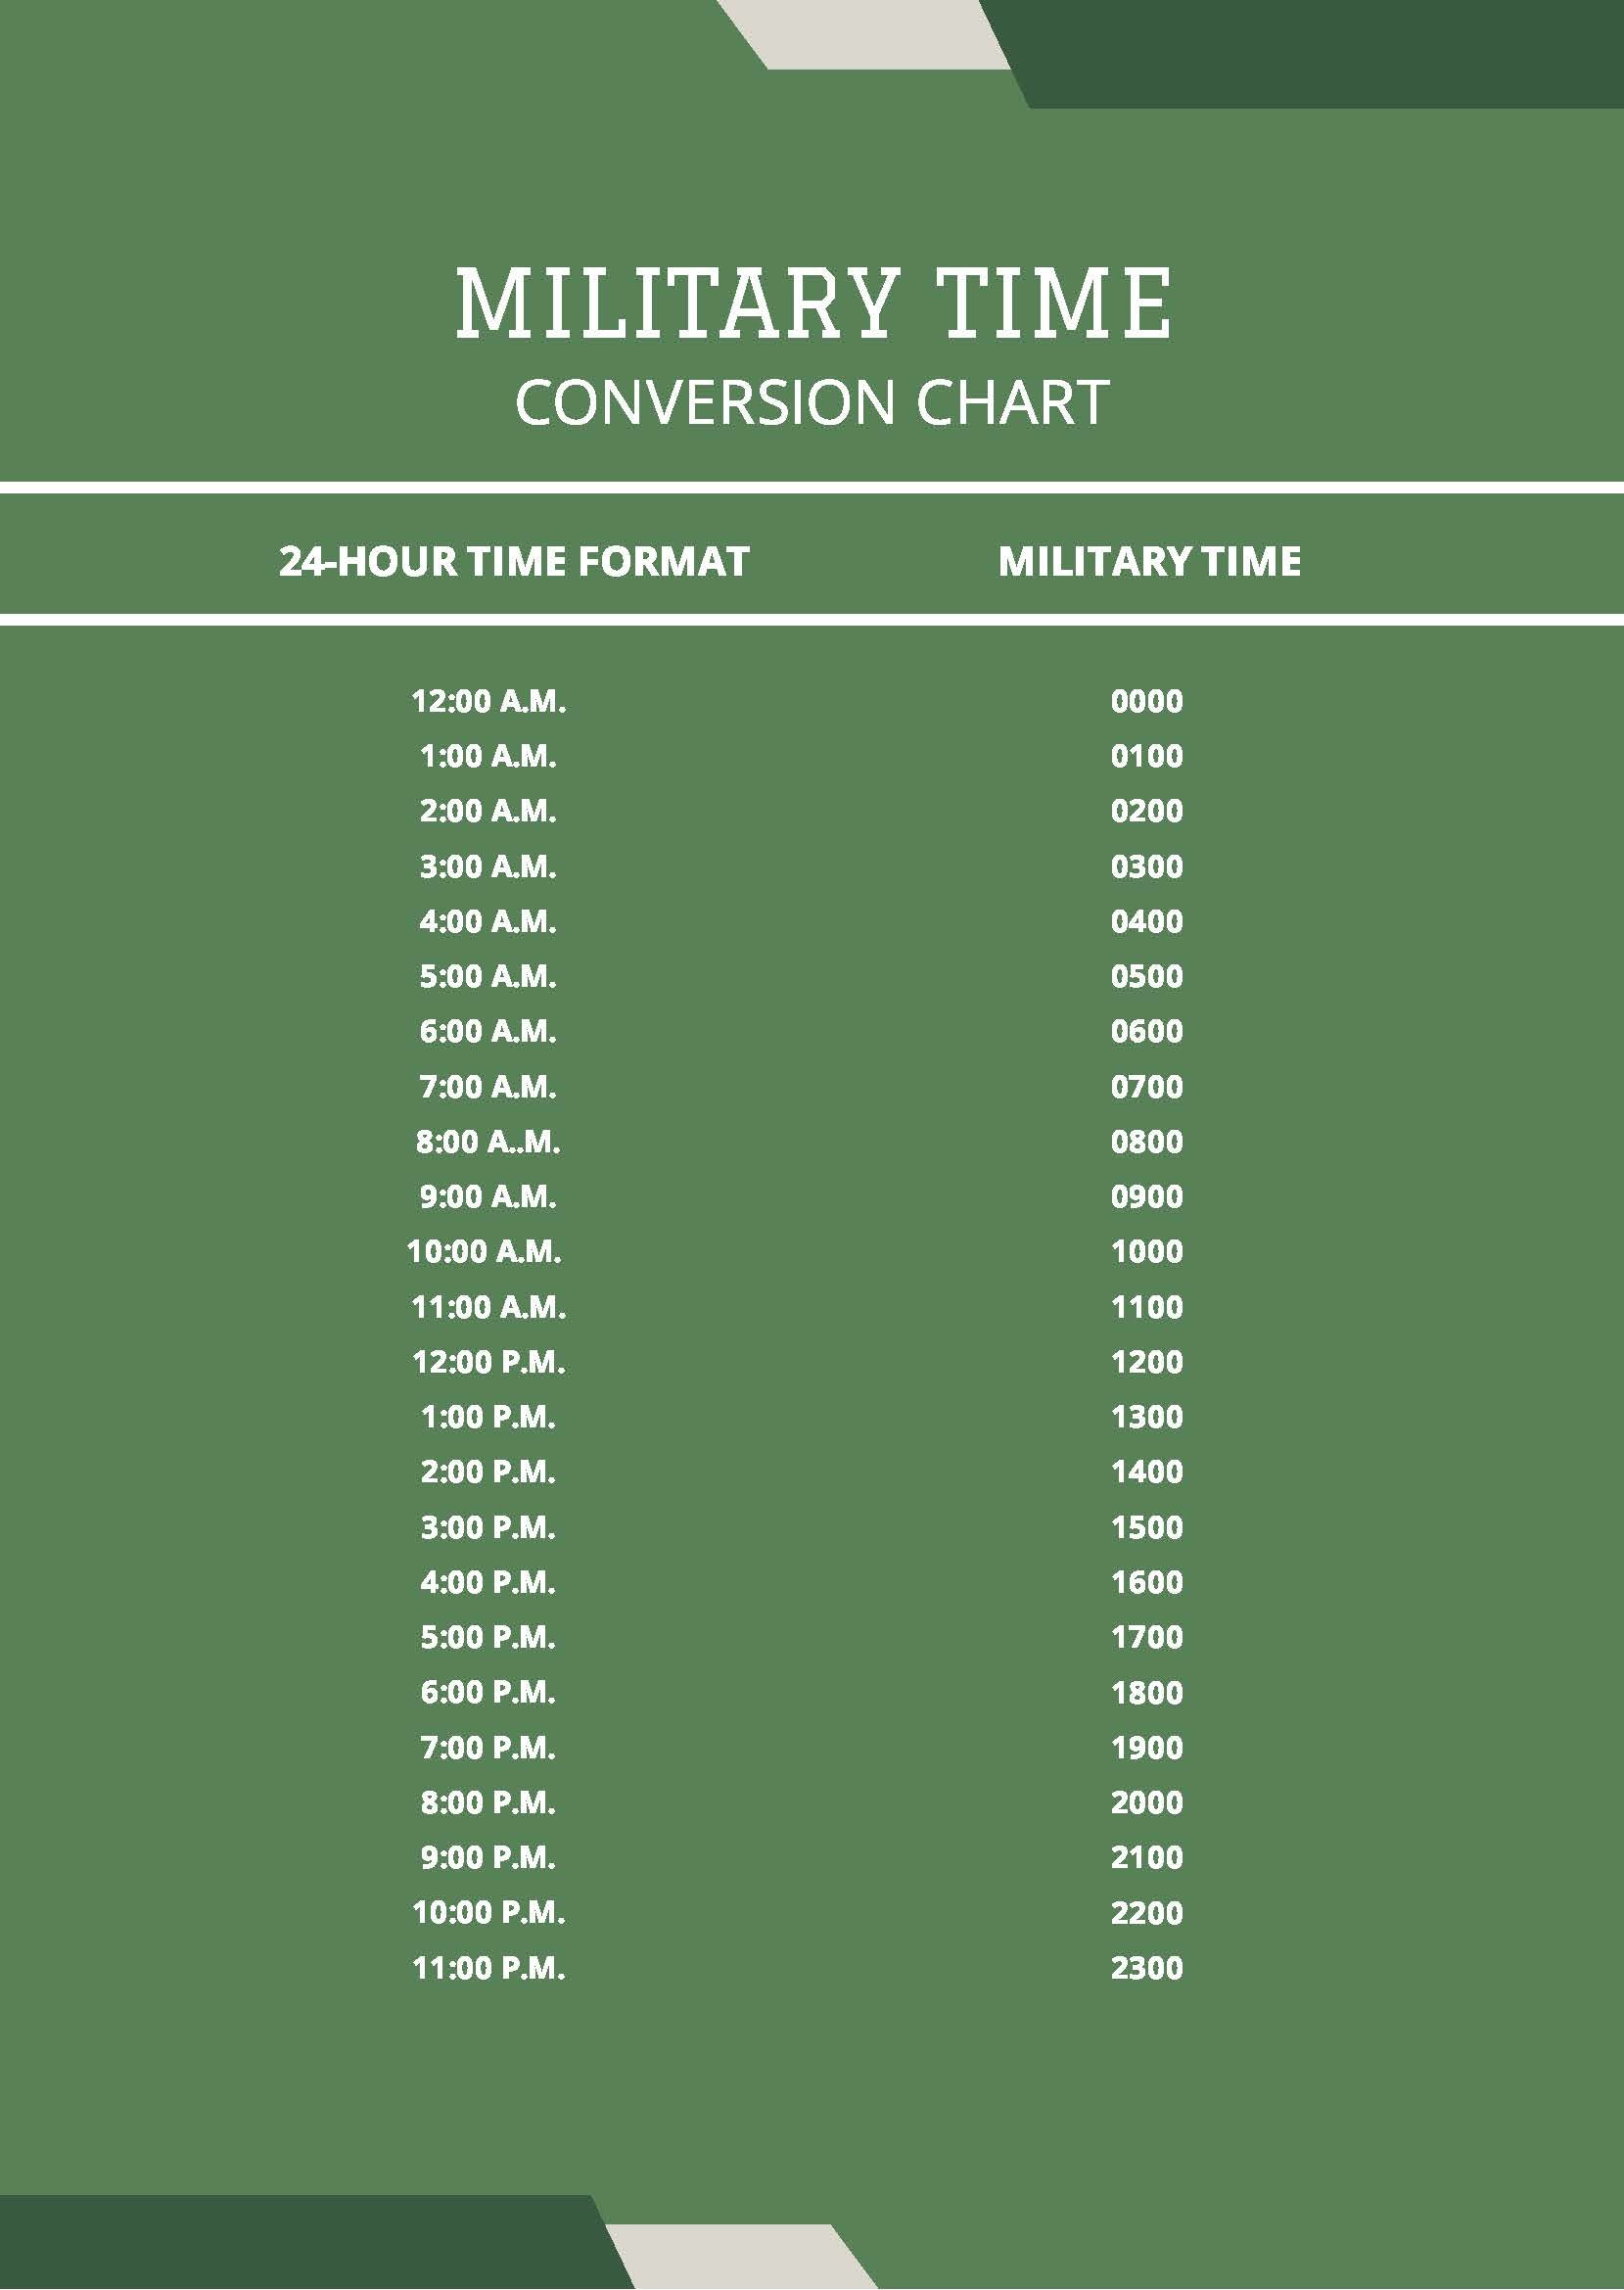 Military Time Conversion Chart in PDF